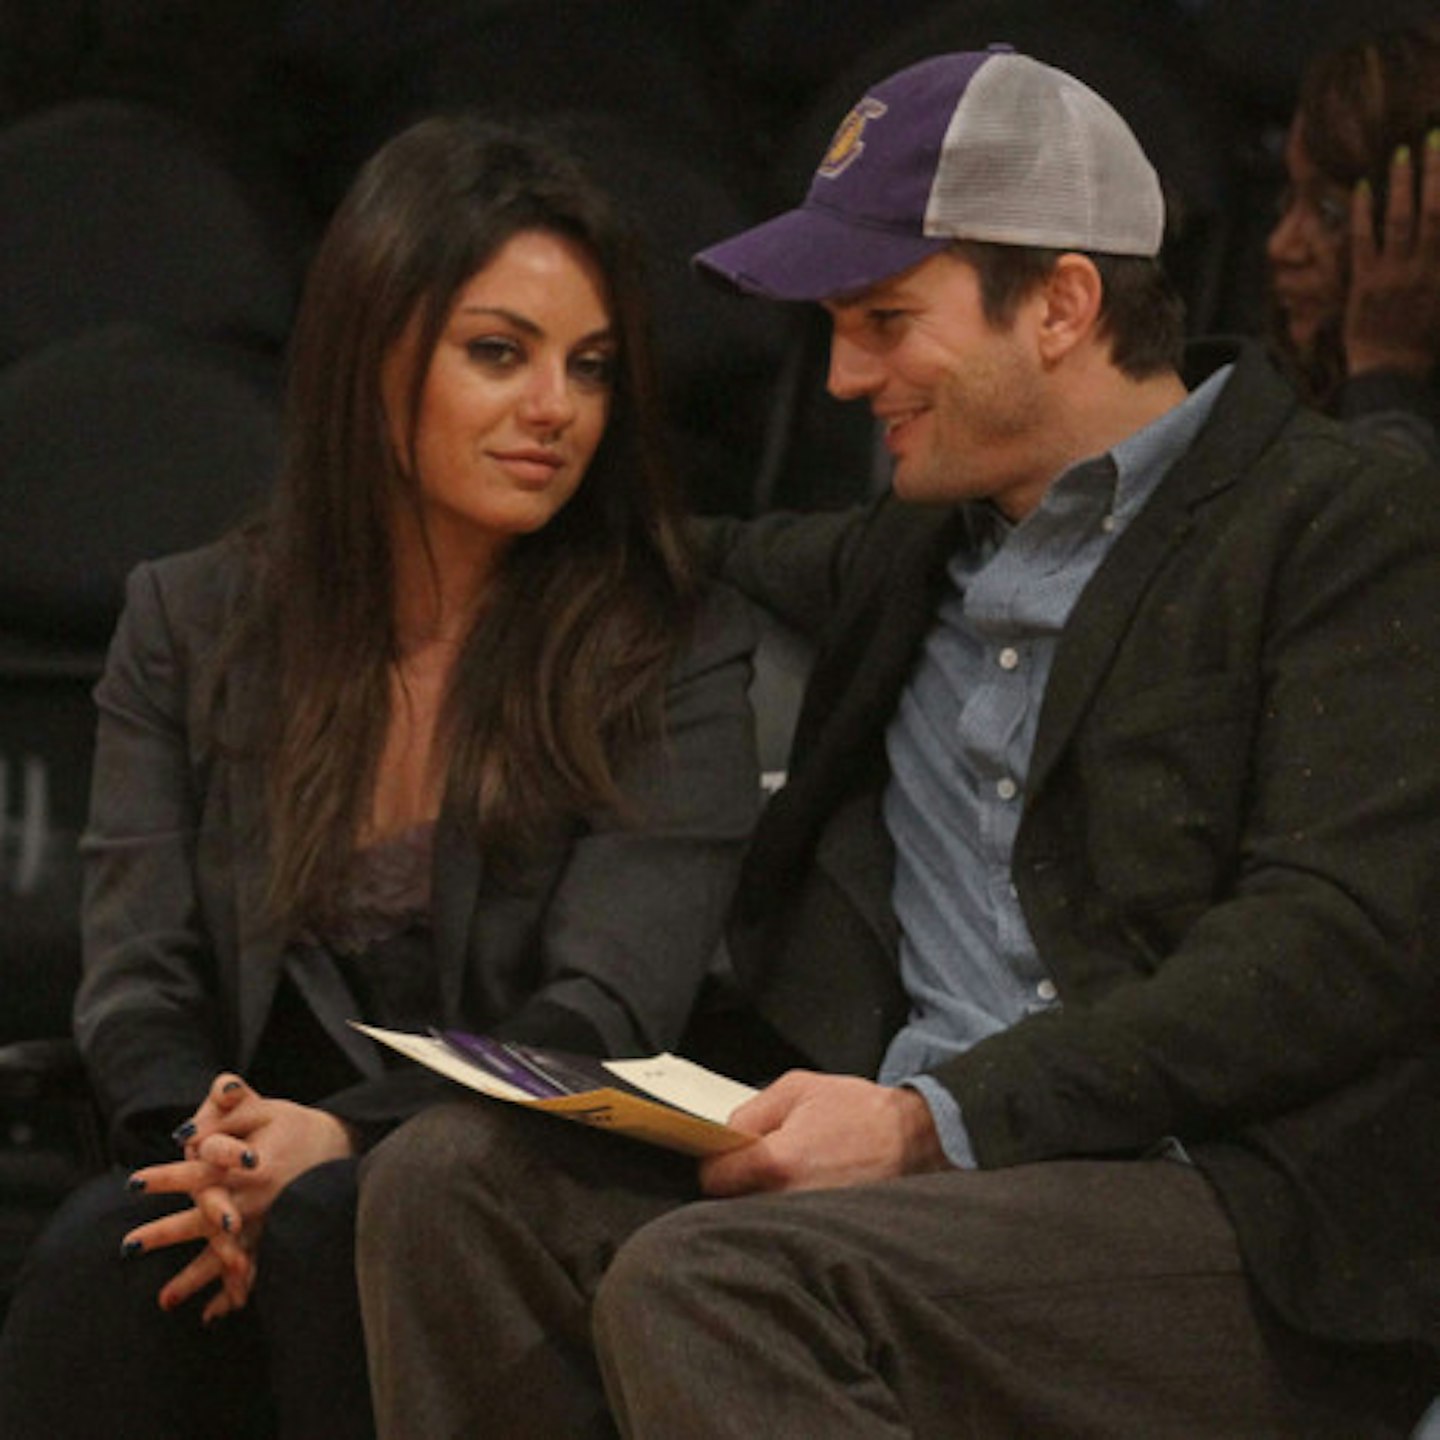 After 'hiding' it for a while, Mila finally confirmed she and Ashton are expecting